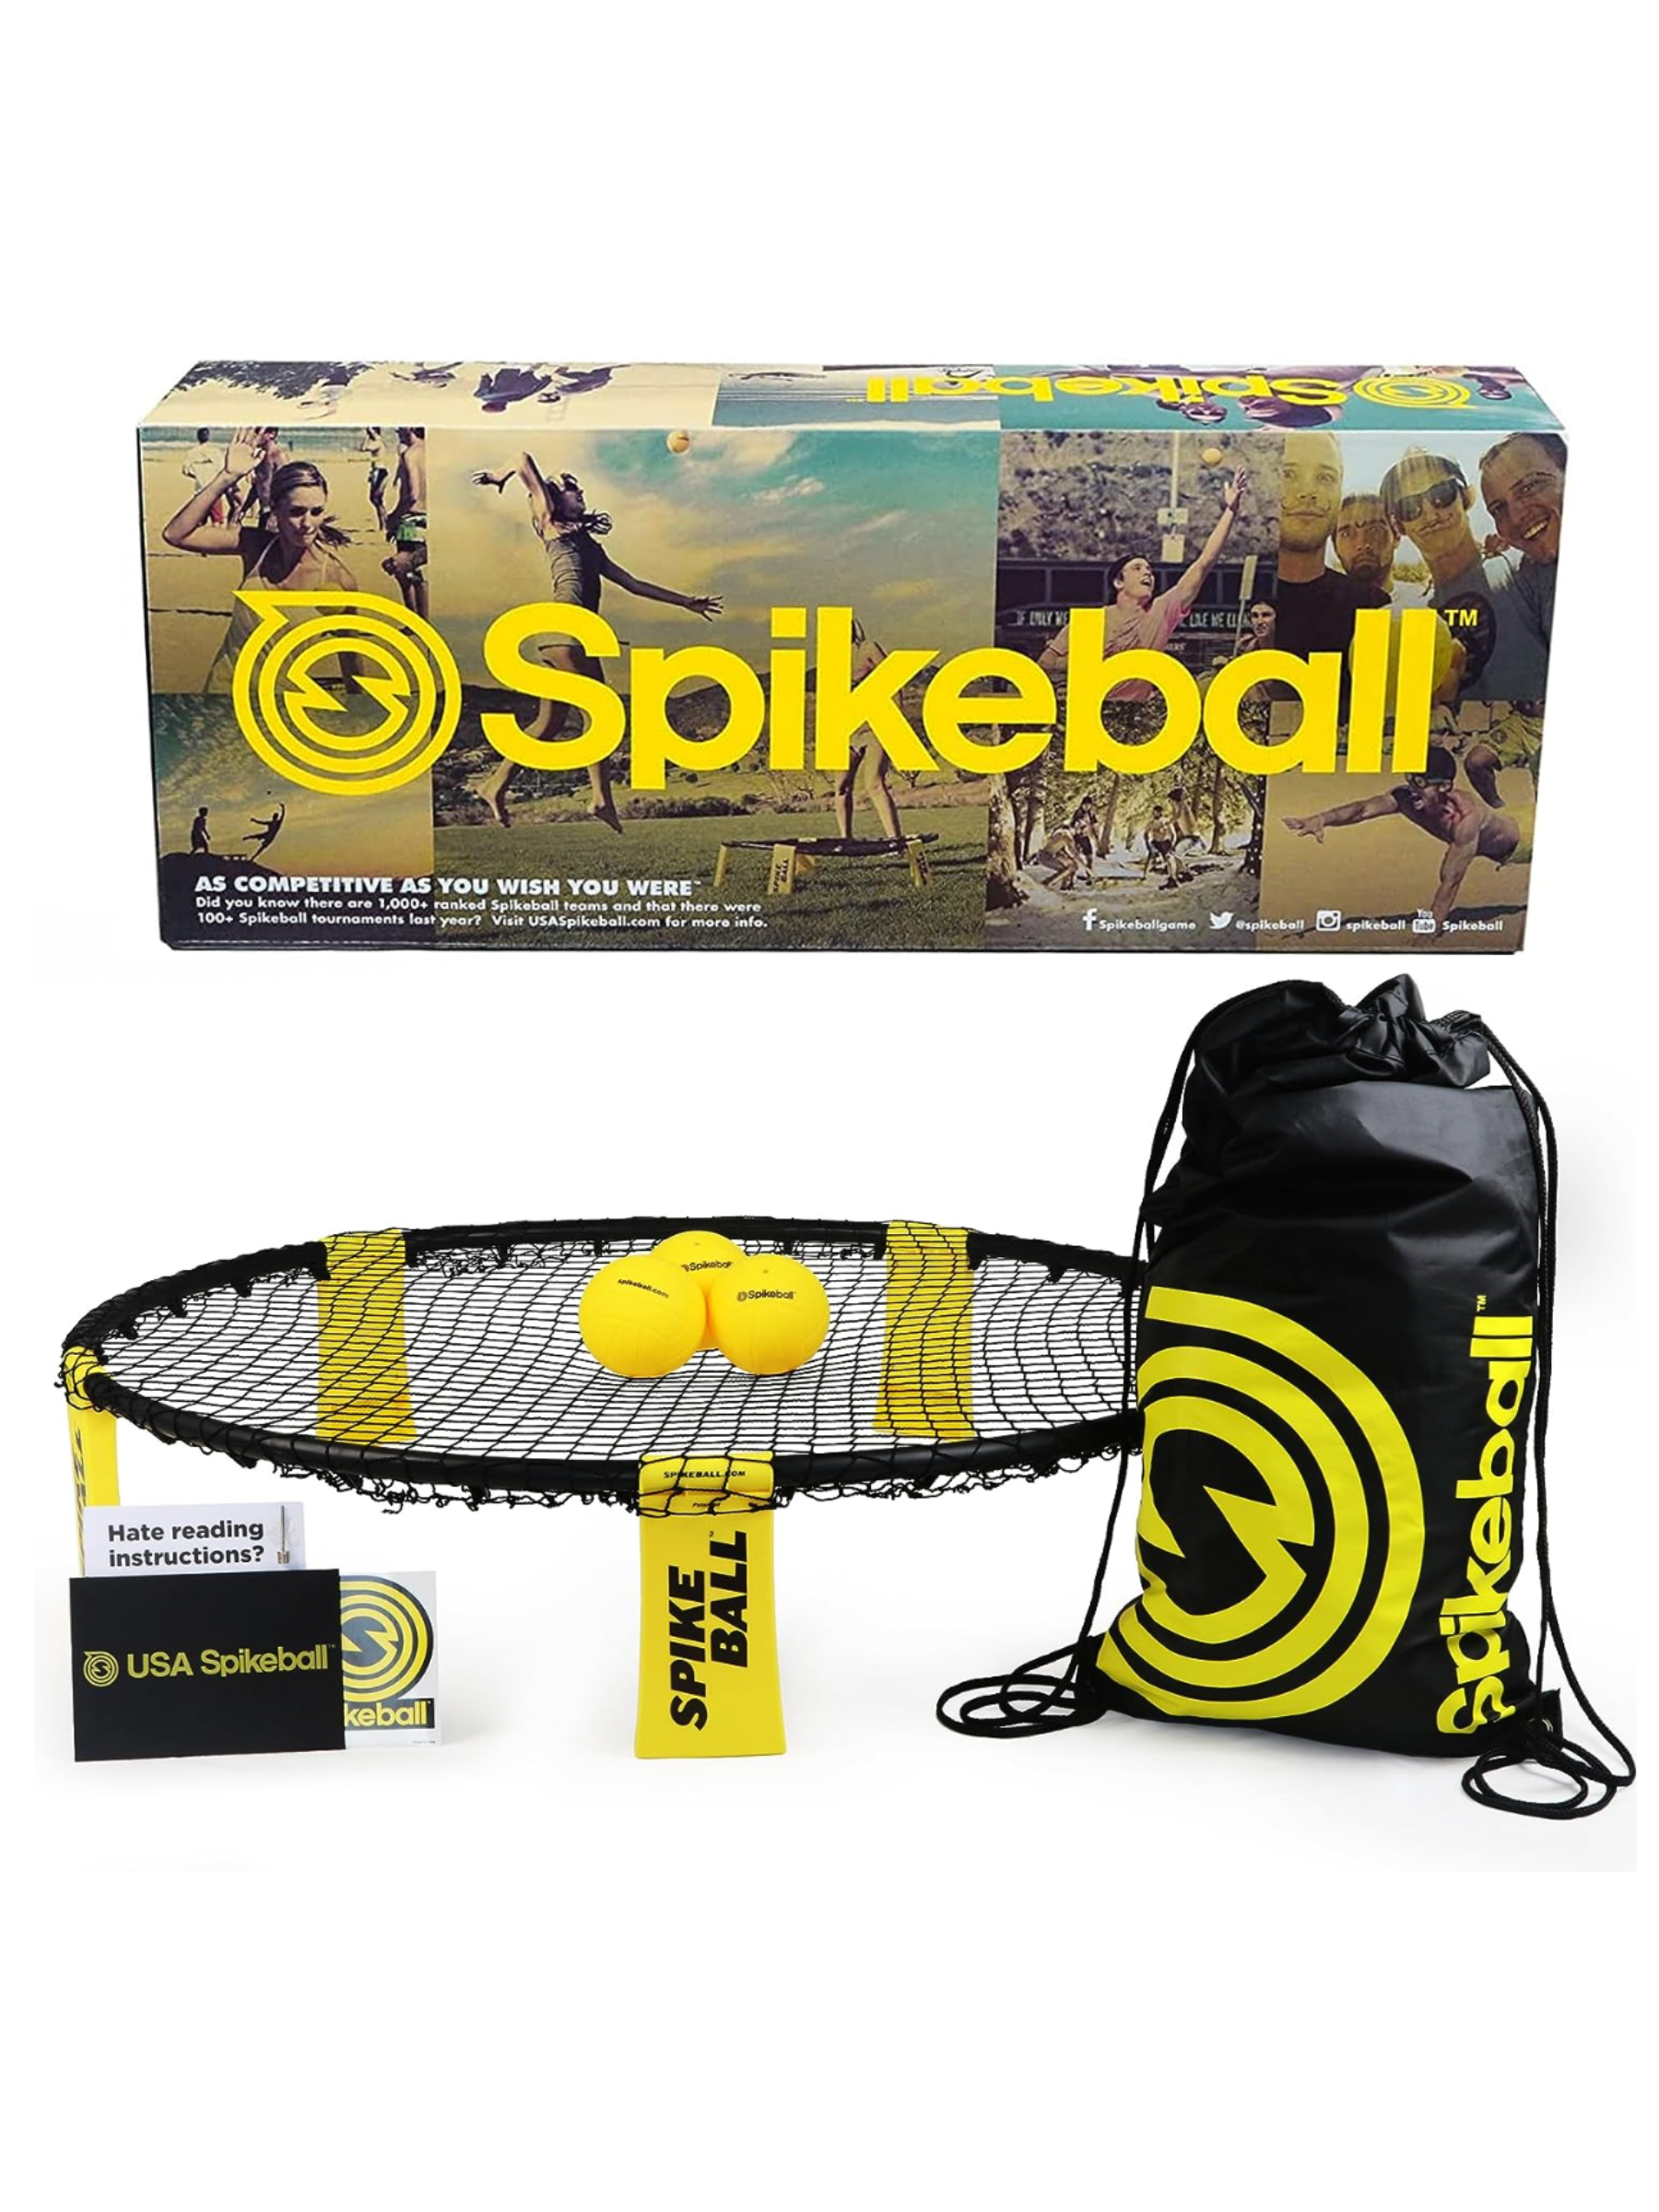 One of the most popular yard games right now, Spikeball should be in his lazy-day arsenal. (We bet his dad will also want to get in on the fun.) $70, Amazon. <a href="https://www.amazon.com/Spikeball-Ball-Kit-Playing-Drawstring/dp/B002V7A7MQ/?th=1">Get it now!</a><p>Sign up for today’s biggest stories, from pop culture to politics.</p><a href="https://www.glamour.com/newsletter/news?sourceCode=msnsend">Sign Up</a>